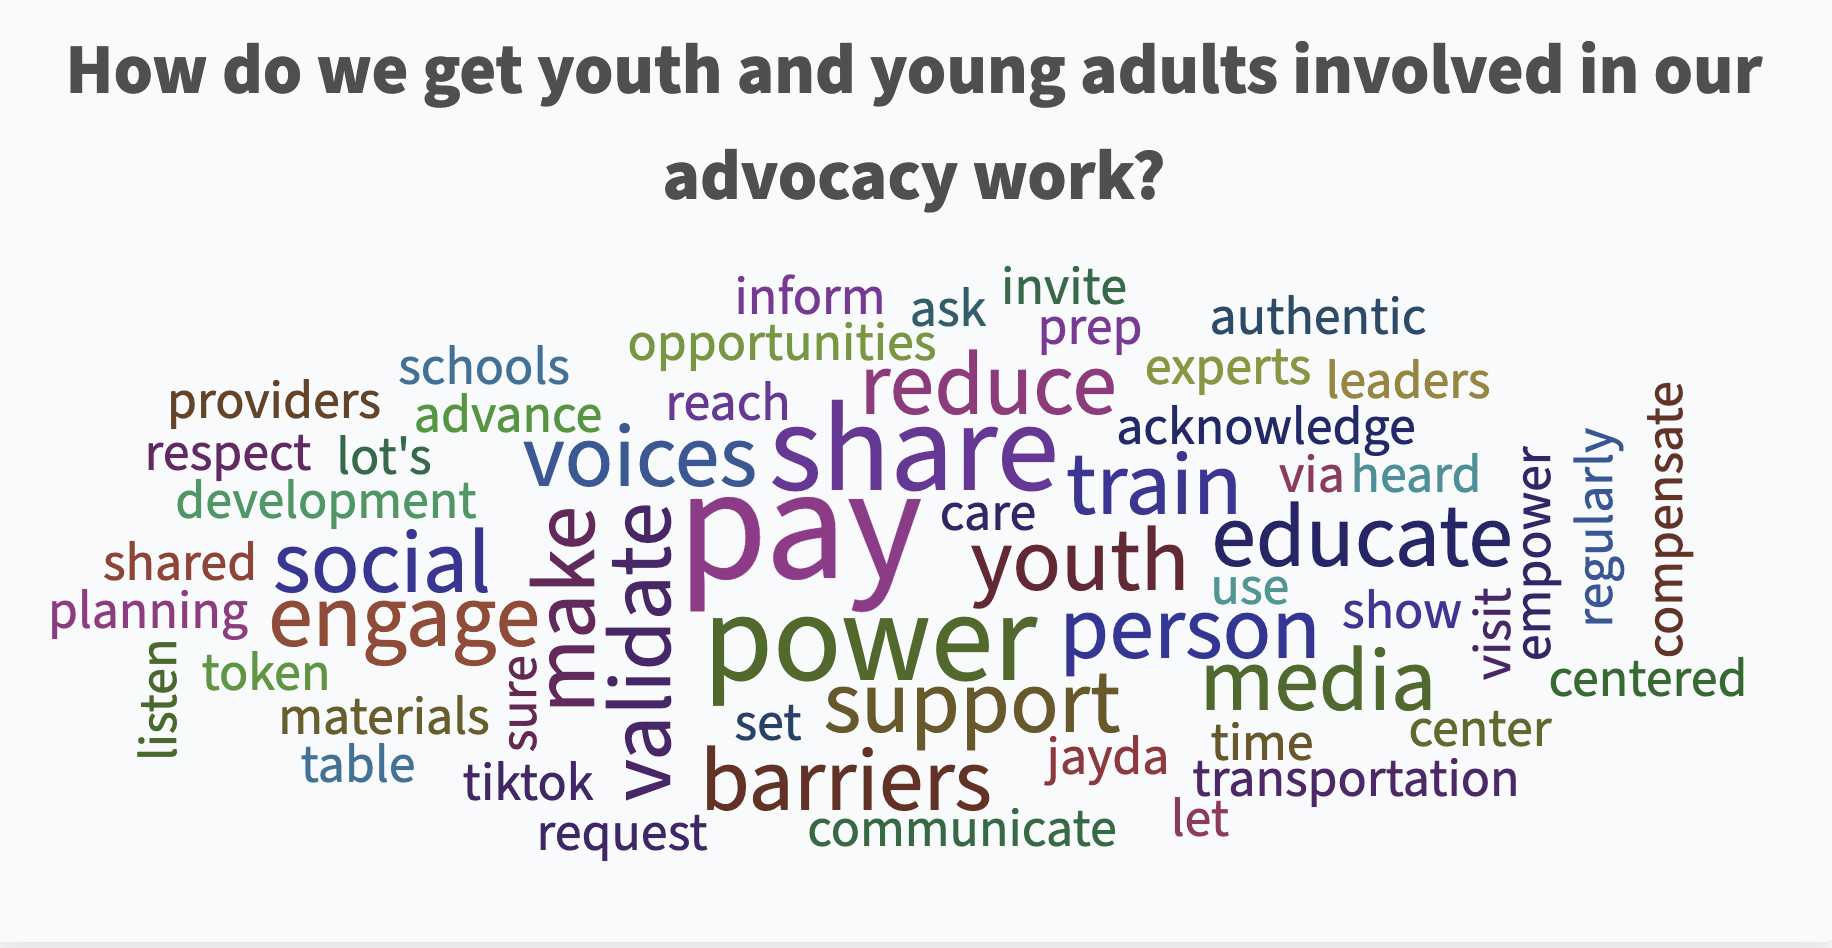 A wordle that asks the question: How do we get Youth and Young Adults involved in our Advocacy work? The wordle contains words like: Pay, Share, Train, Engage, Respect, Validate, Power, Plan